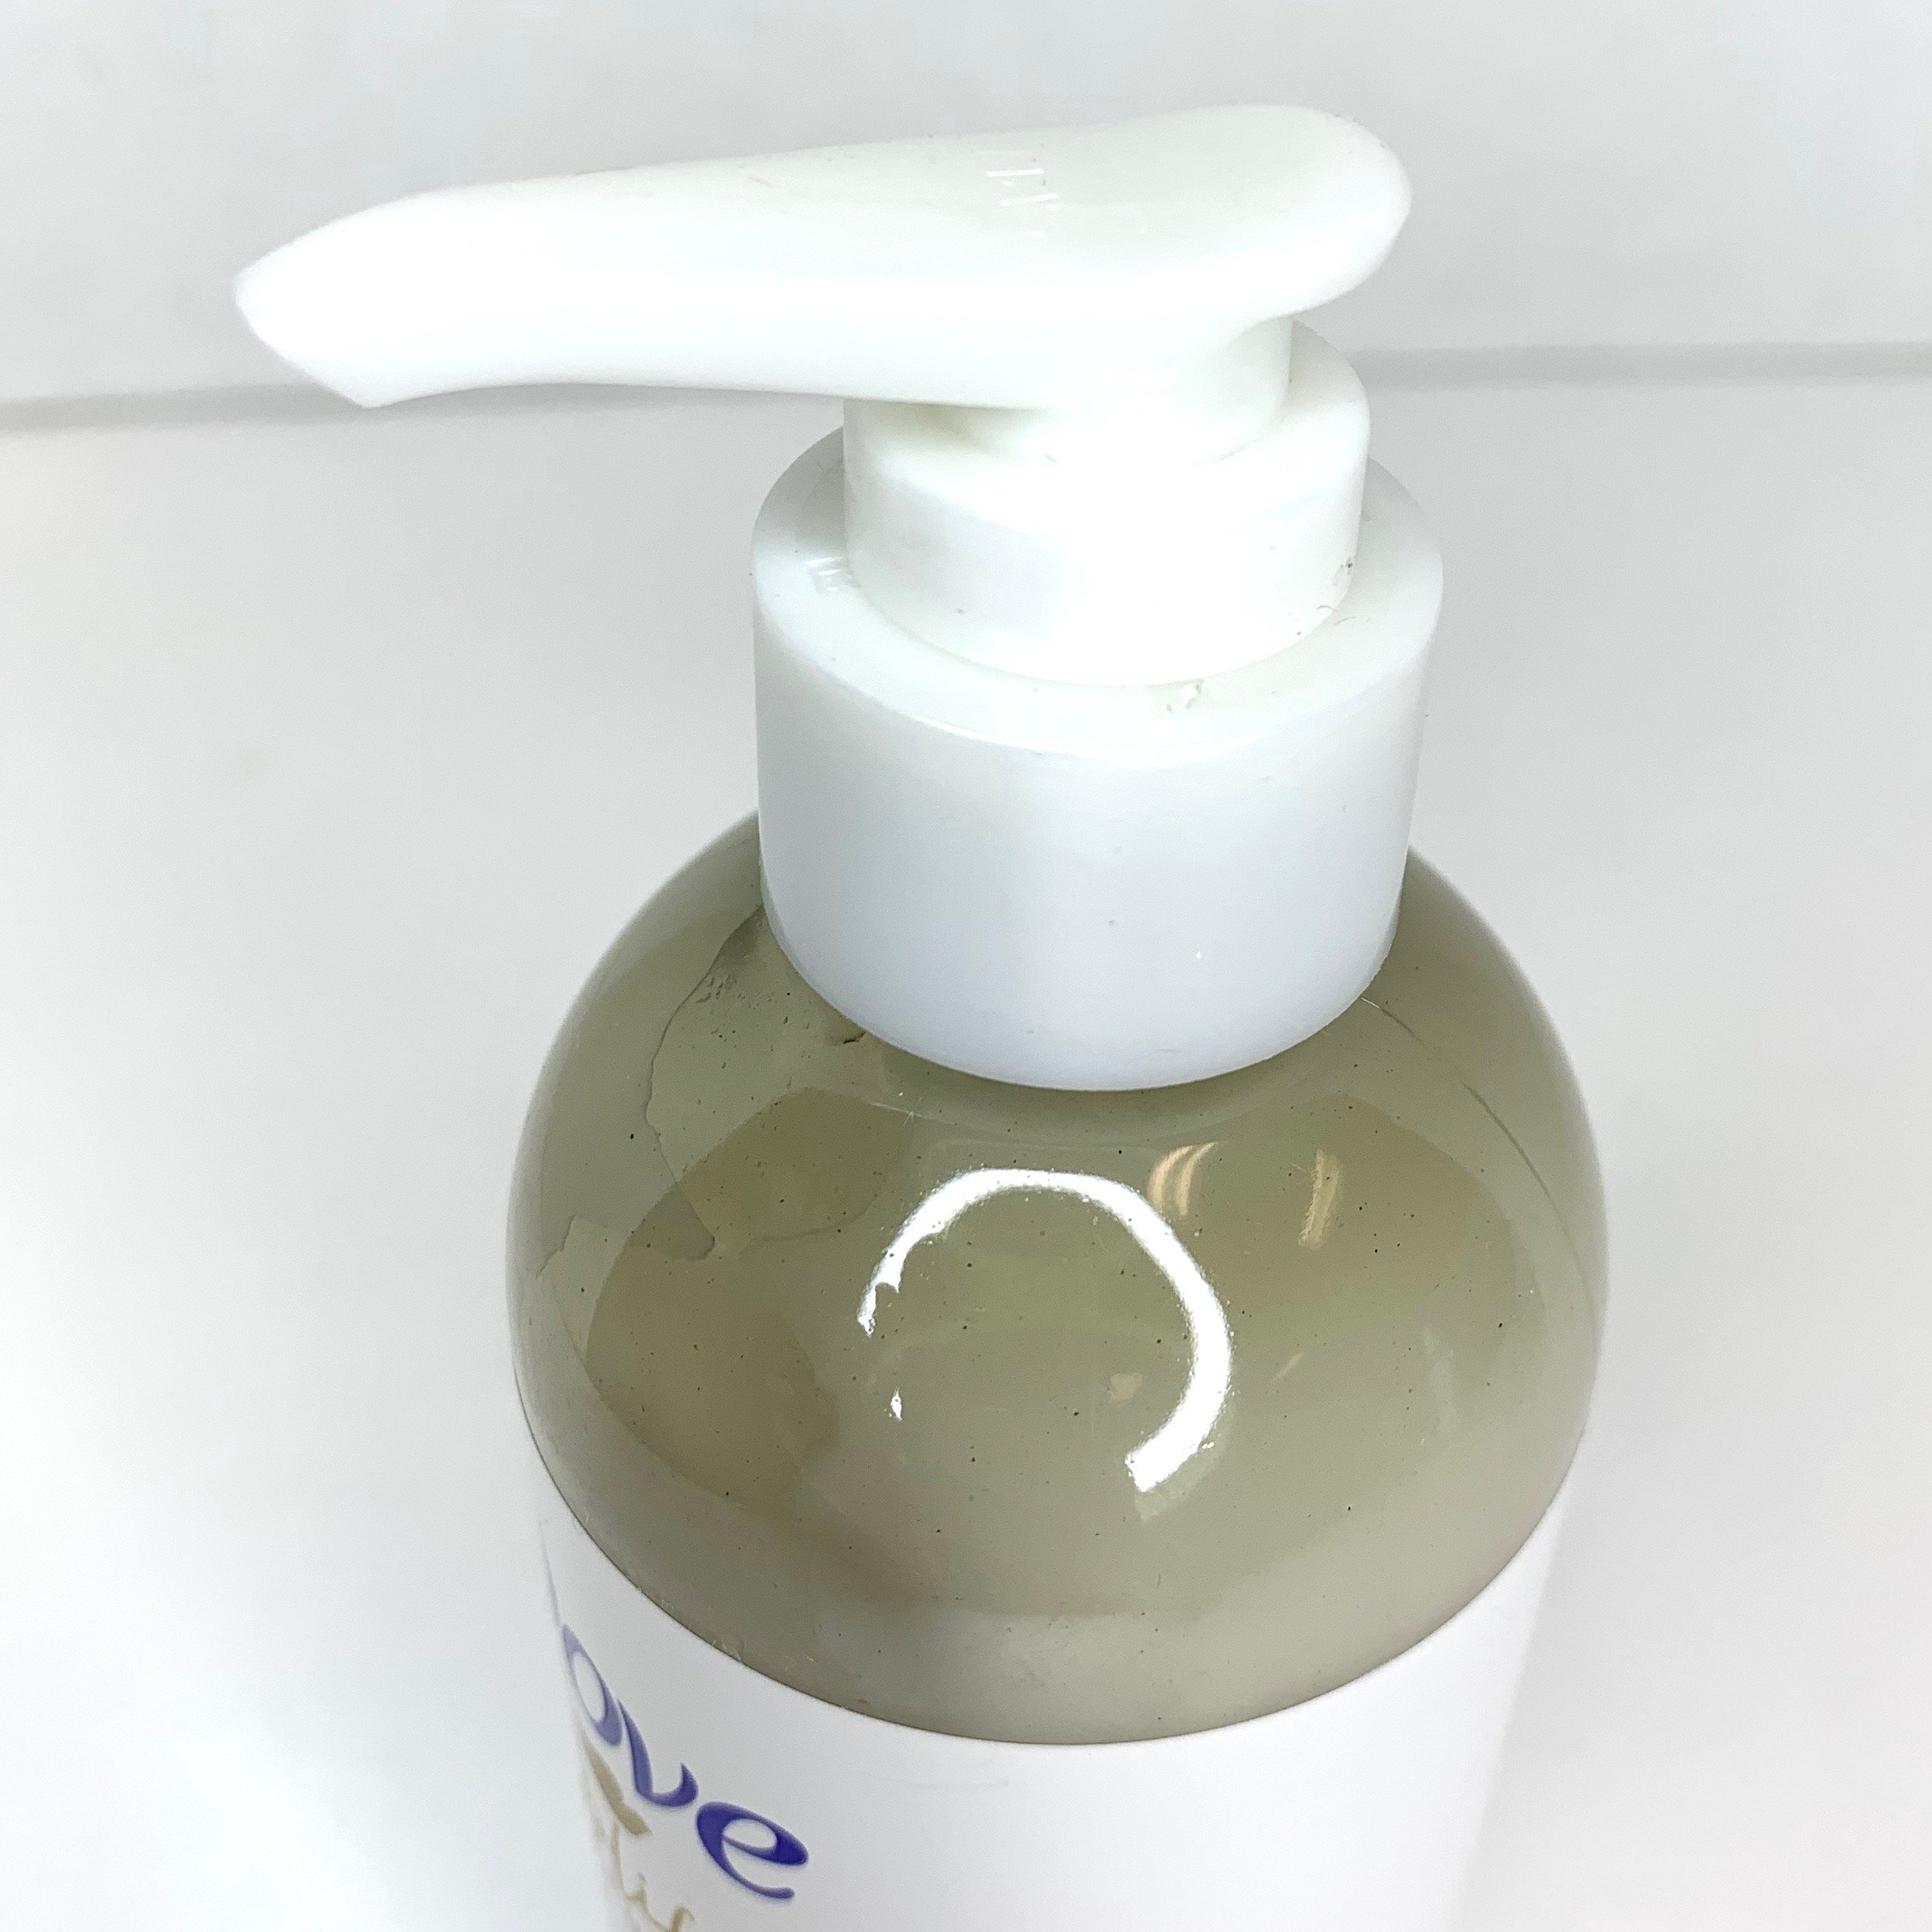 Dove Amplified Textures Moisture Locking Leave-In Conditioner Close-Up for Cocotique April 2020